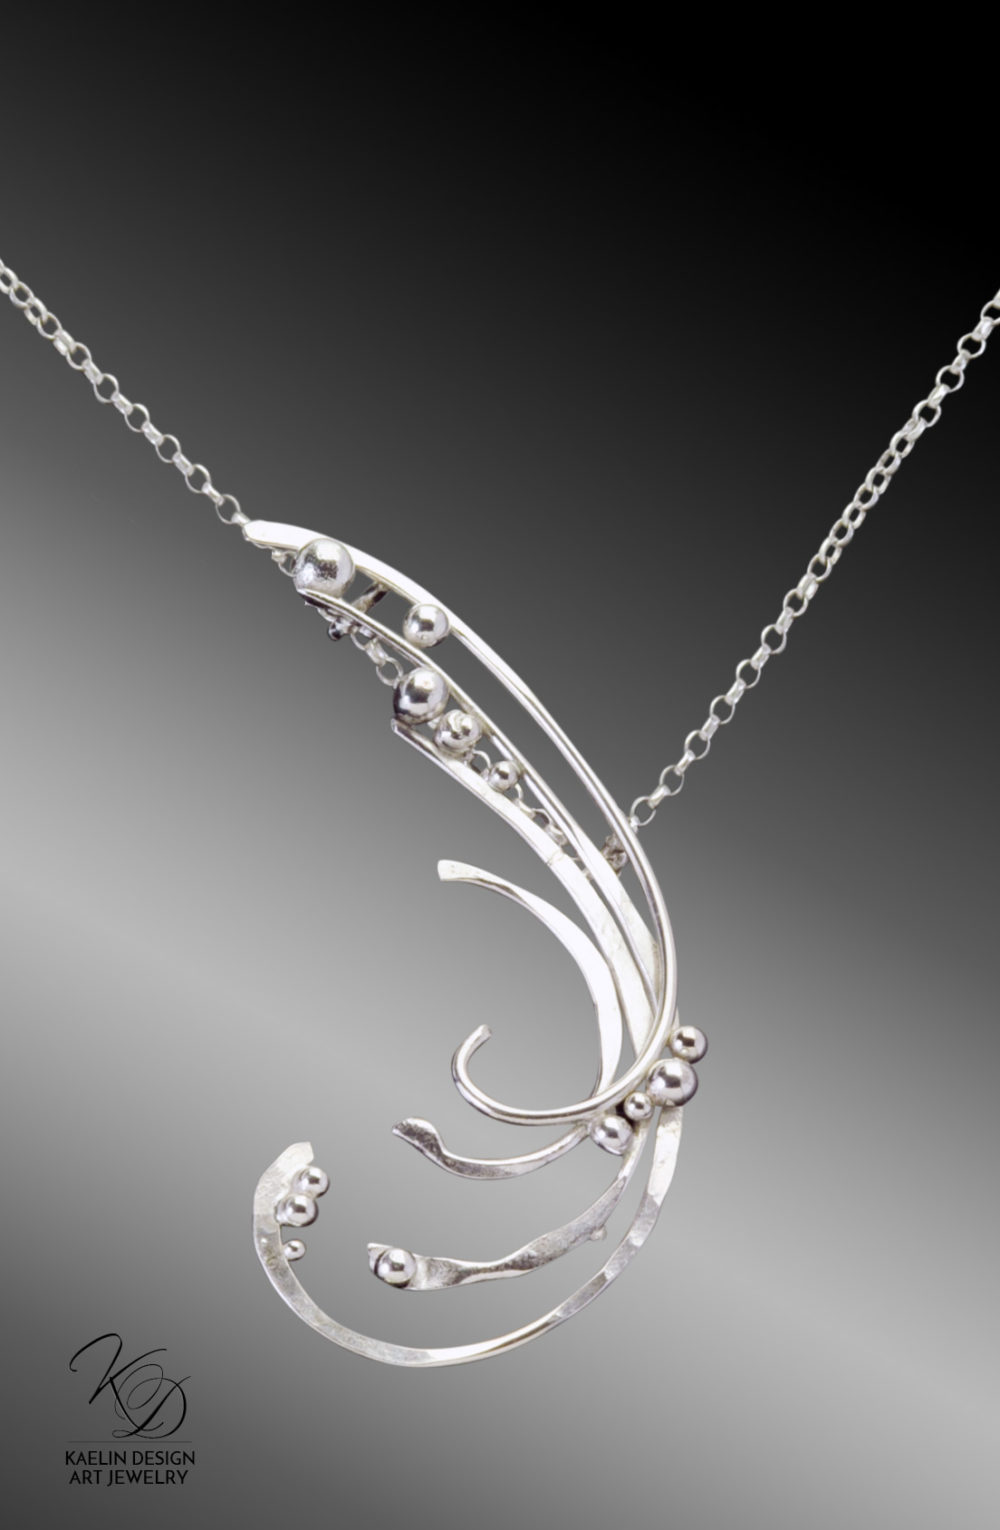 Swept Away Fine Art Jewelry Pendant in Hand Forged Sterling Silver by Kaelin Design